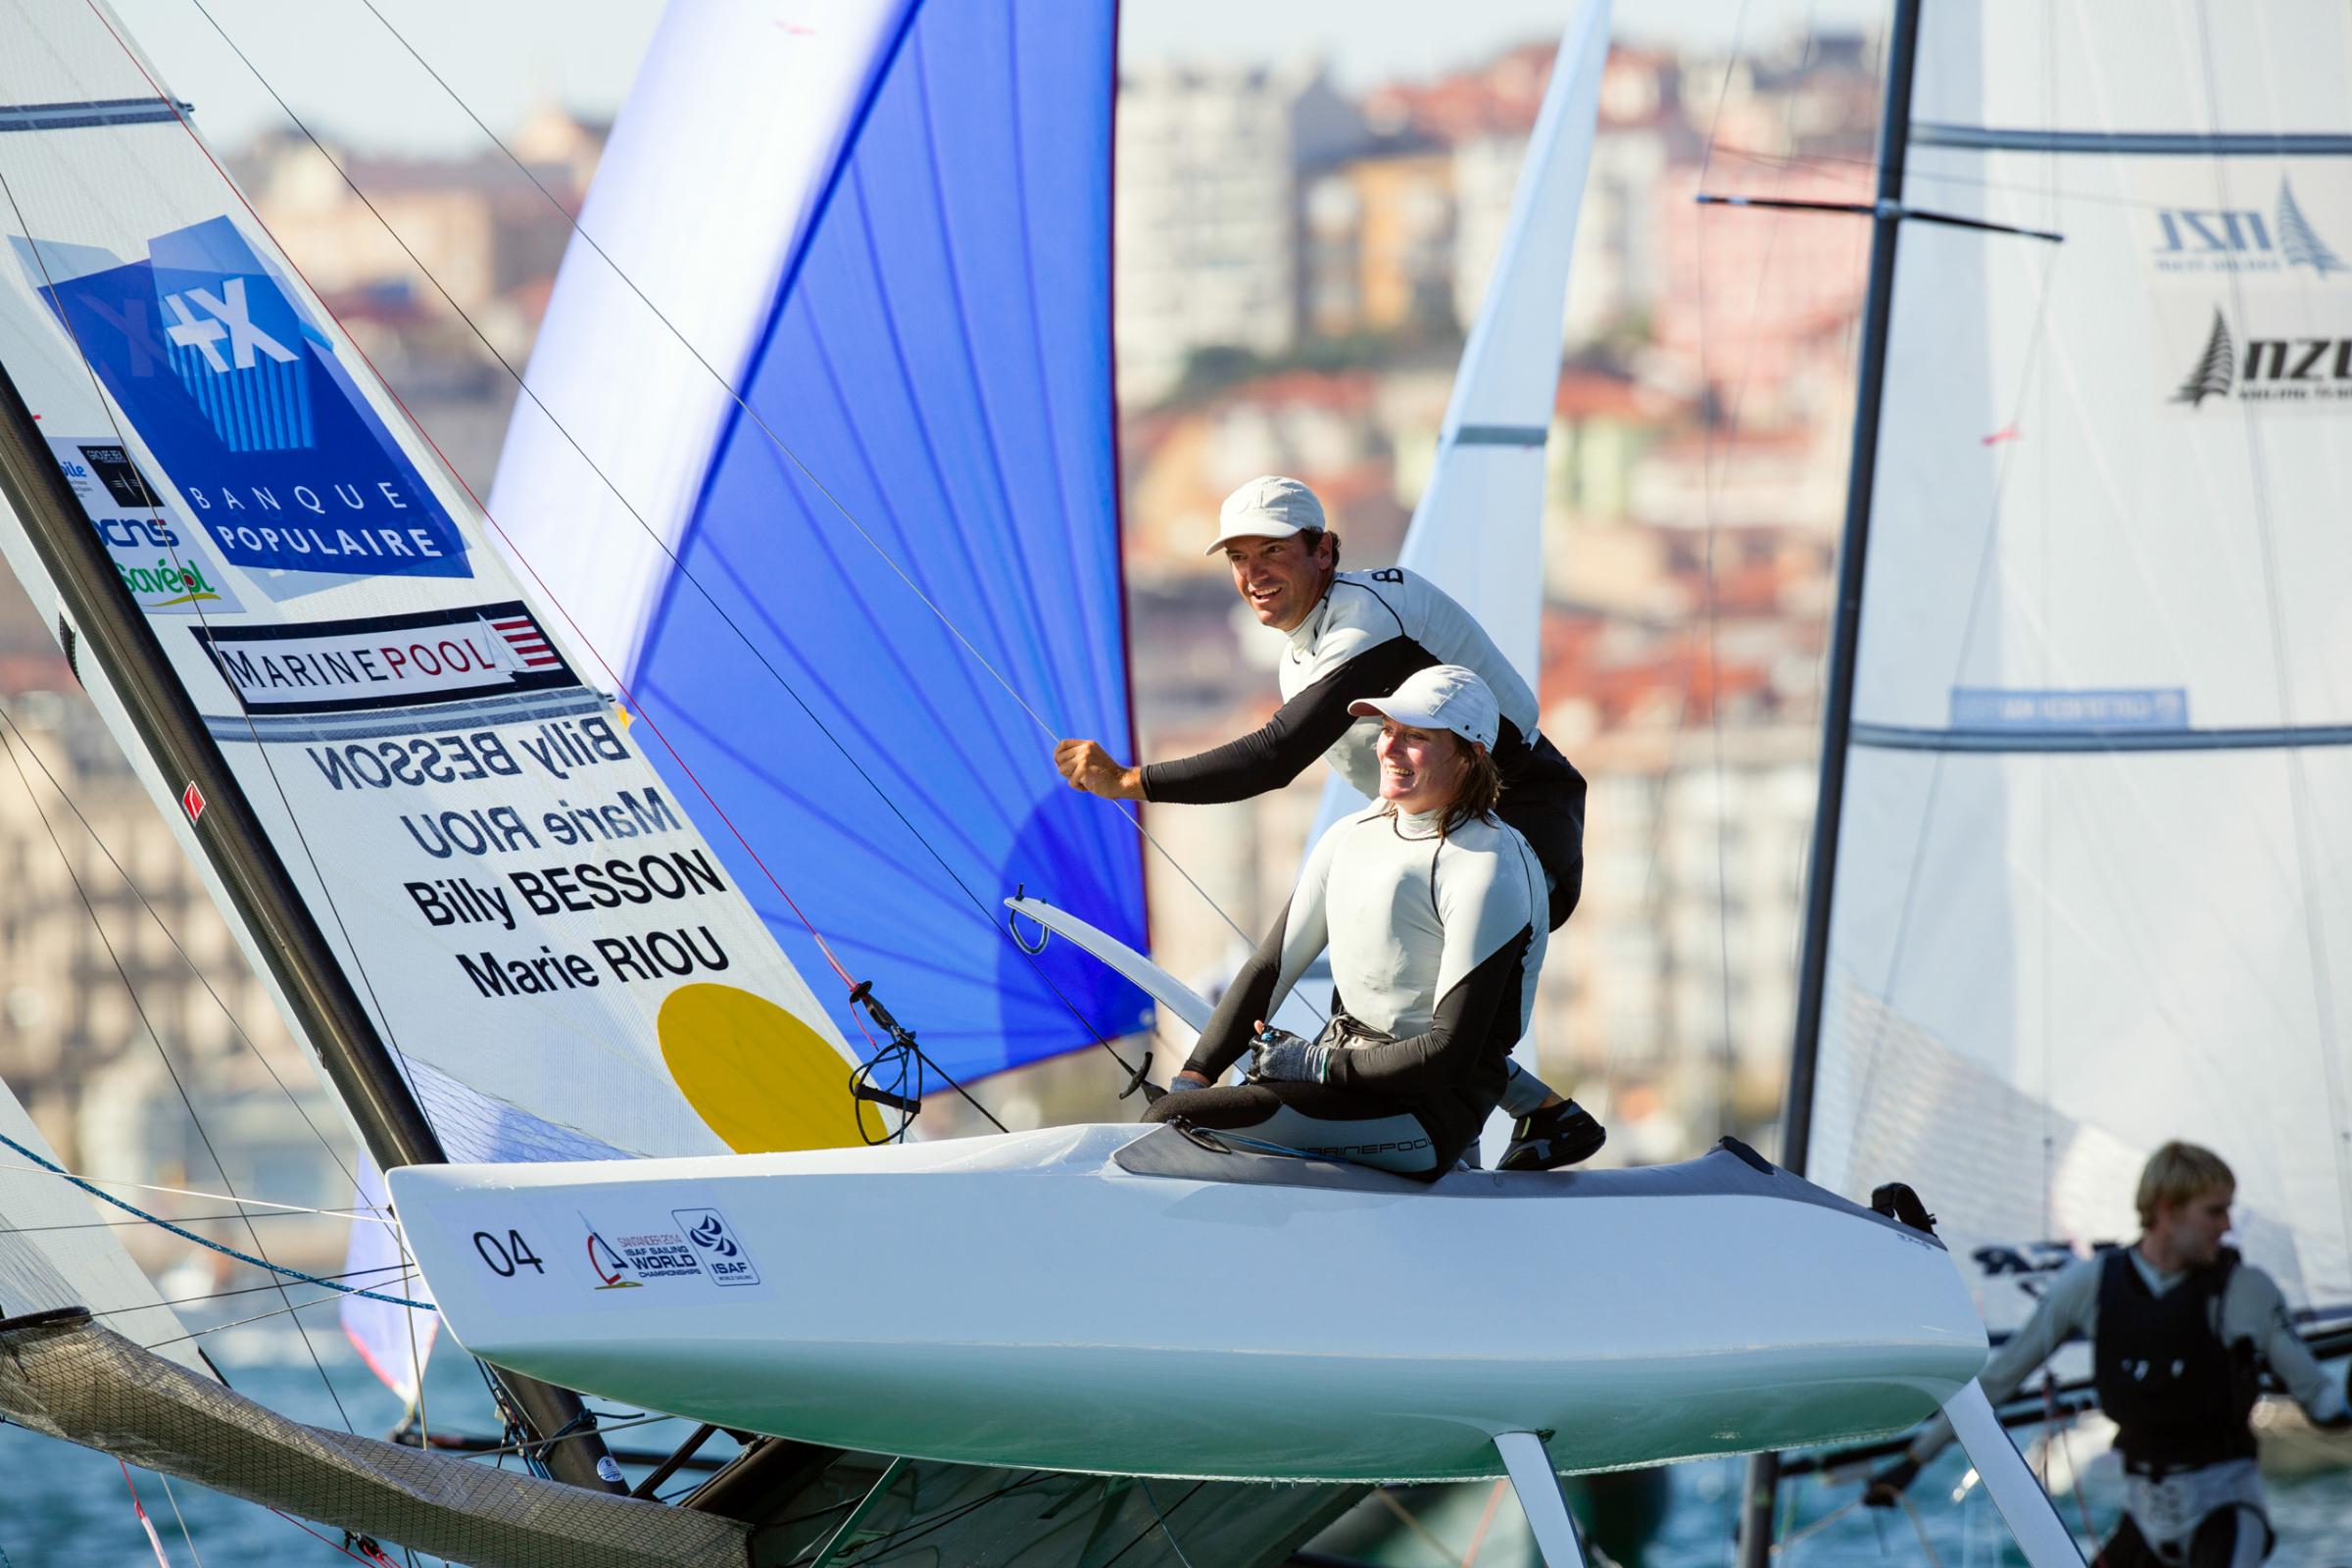 Billy Besson, Marie Riou—Sailing will debut a mixed event in Rio using a catamaran that seems to fly above the water. The biggest hurdle for this French pair, who have won four straight world titles, may be Rio’s polluted Guanabara Bay.